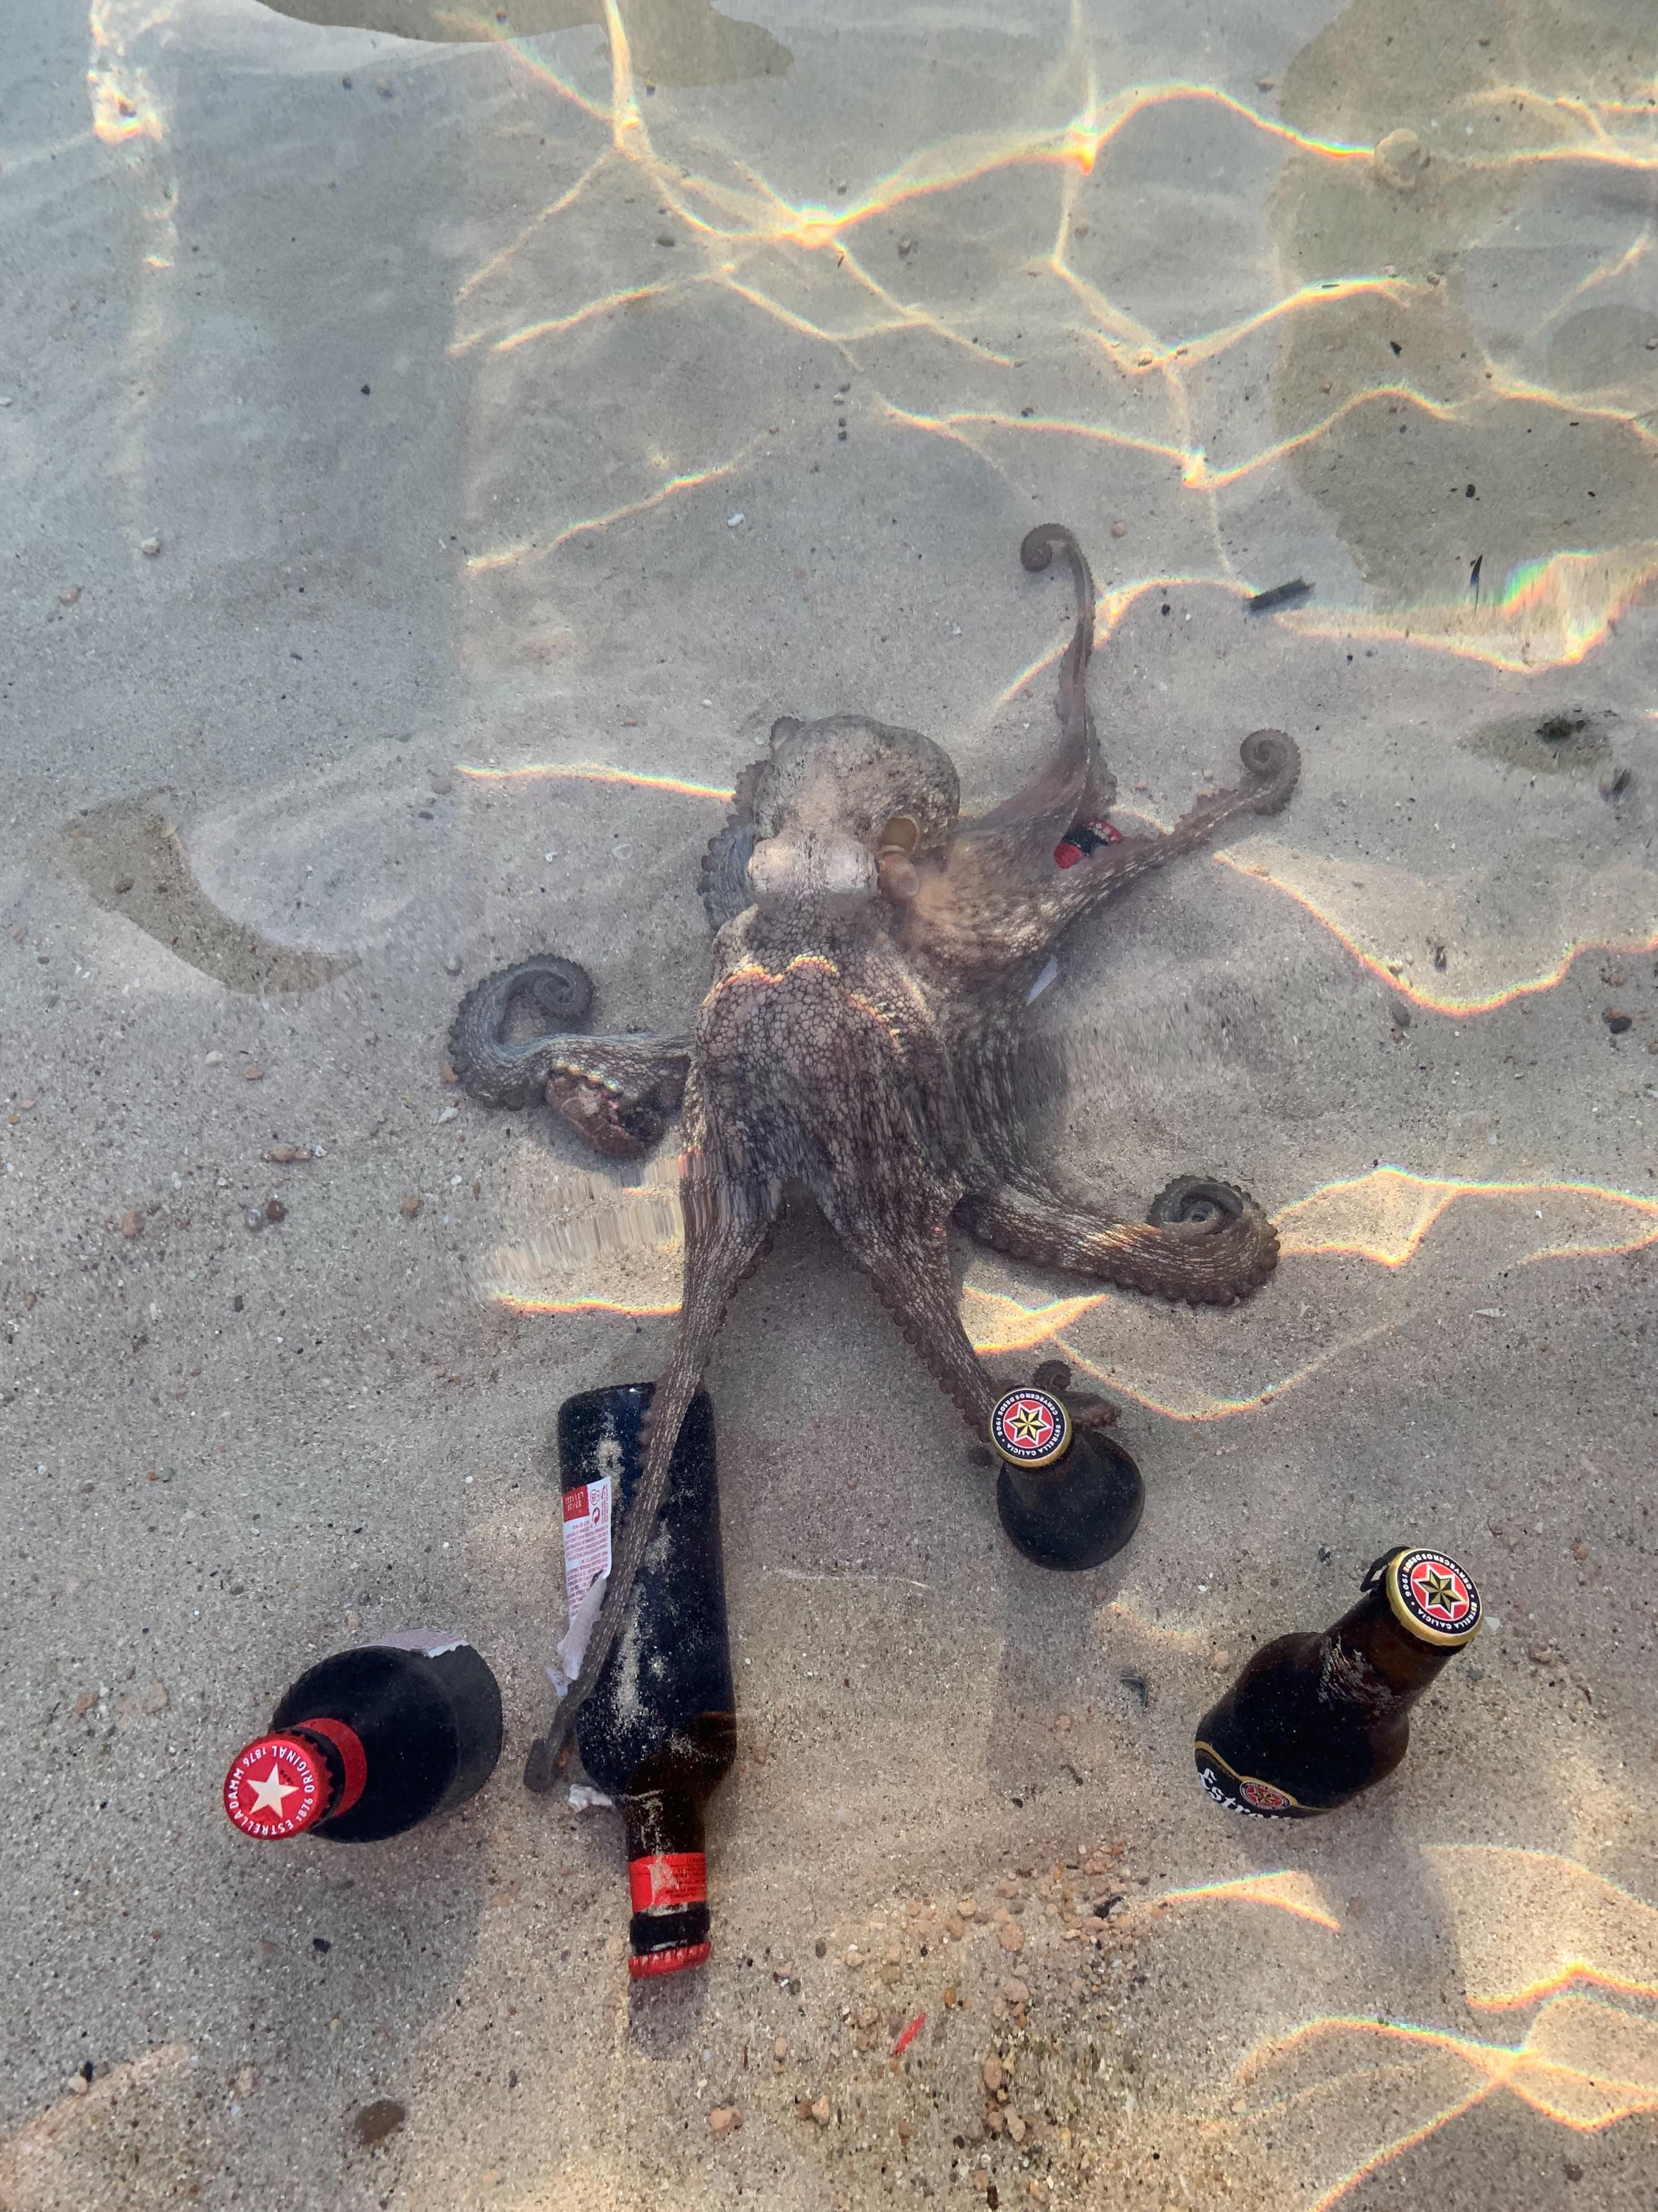 I just tried to chill my beer in the sea, when an octopus stole it...